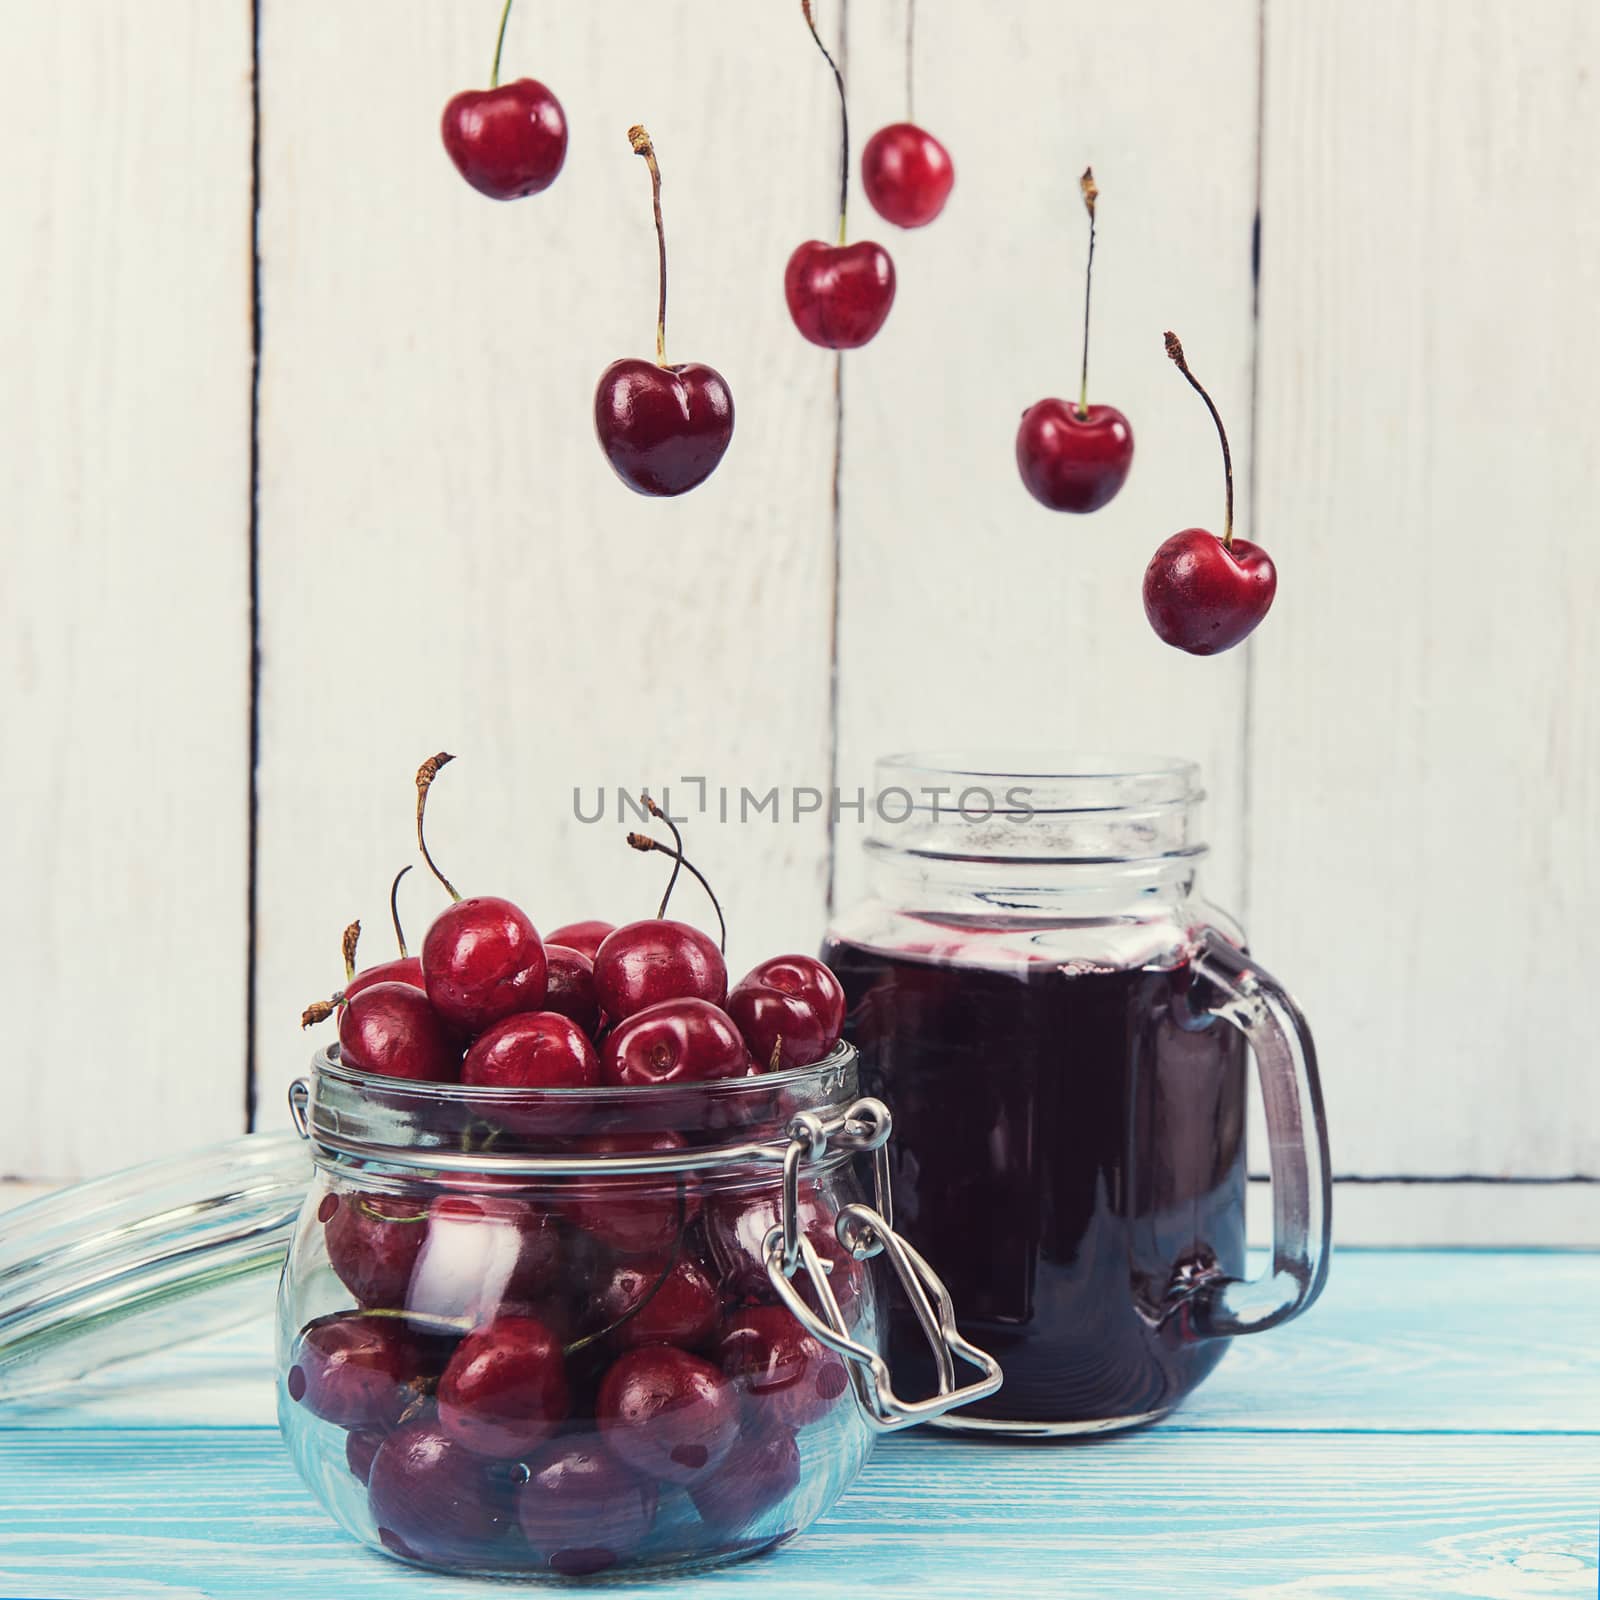 Cherry juice with glass of berries by rusak